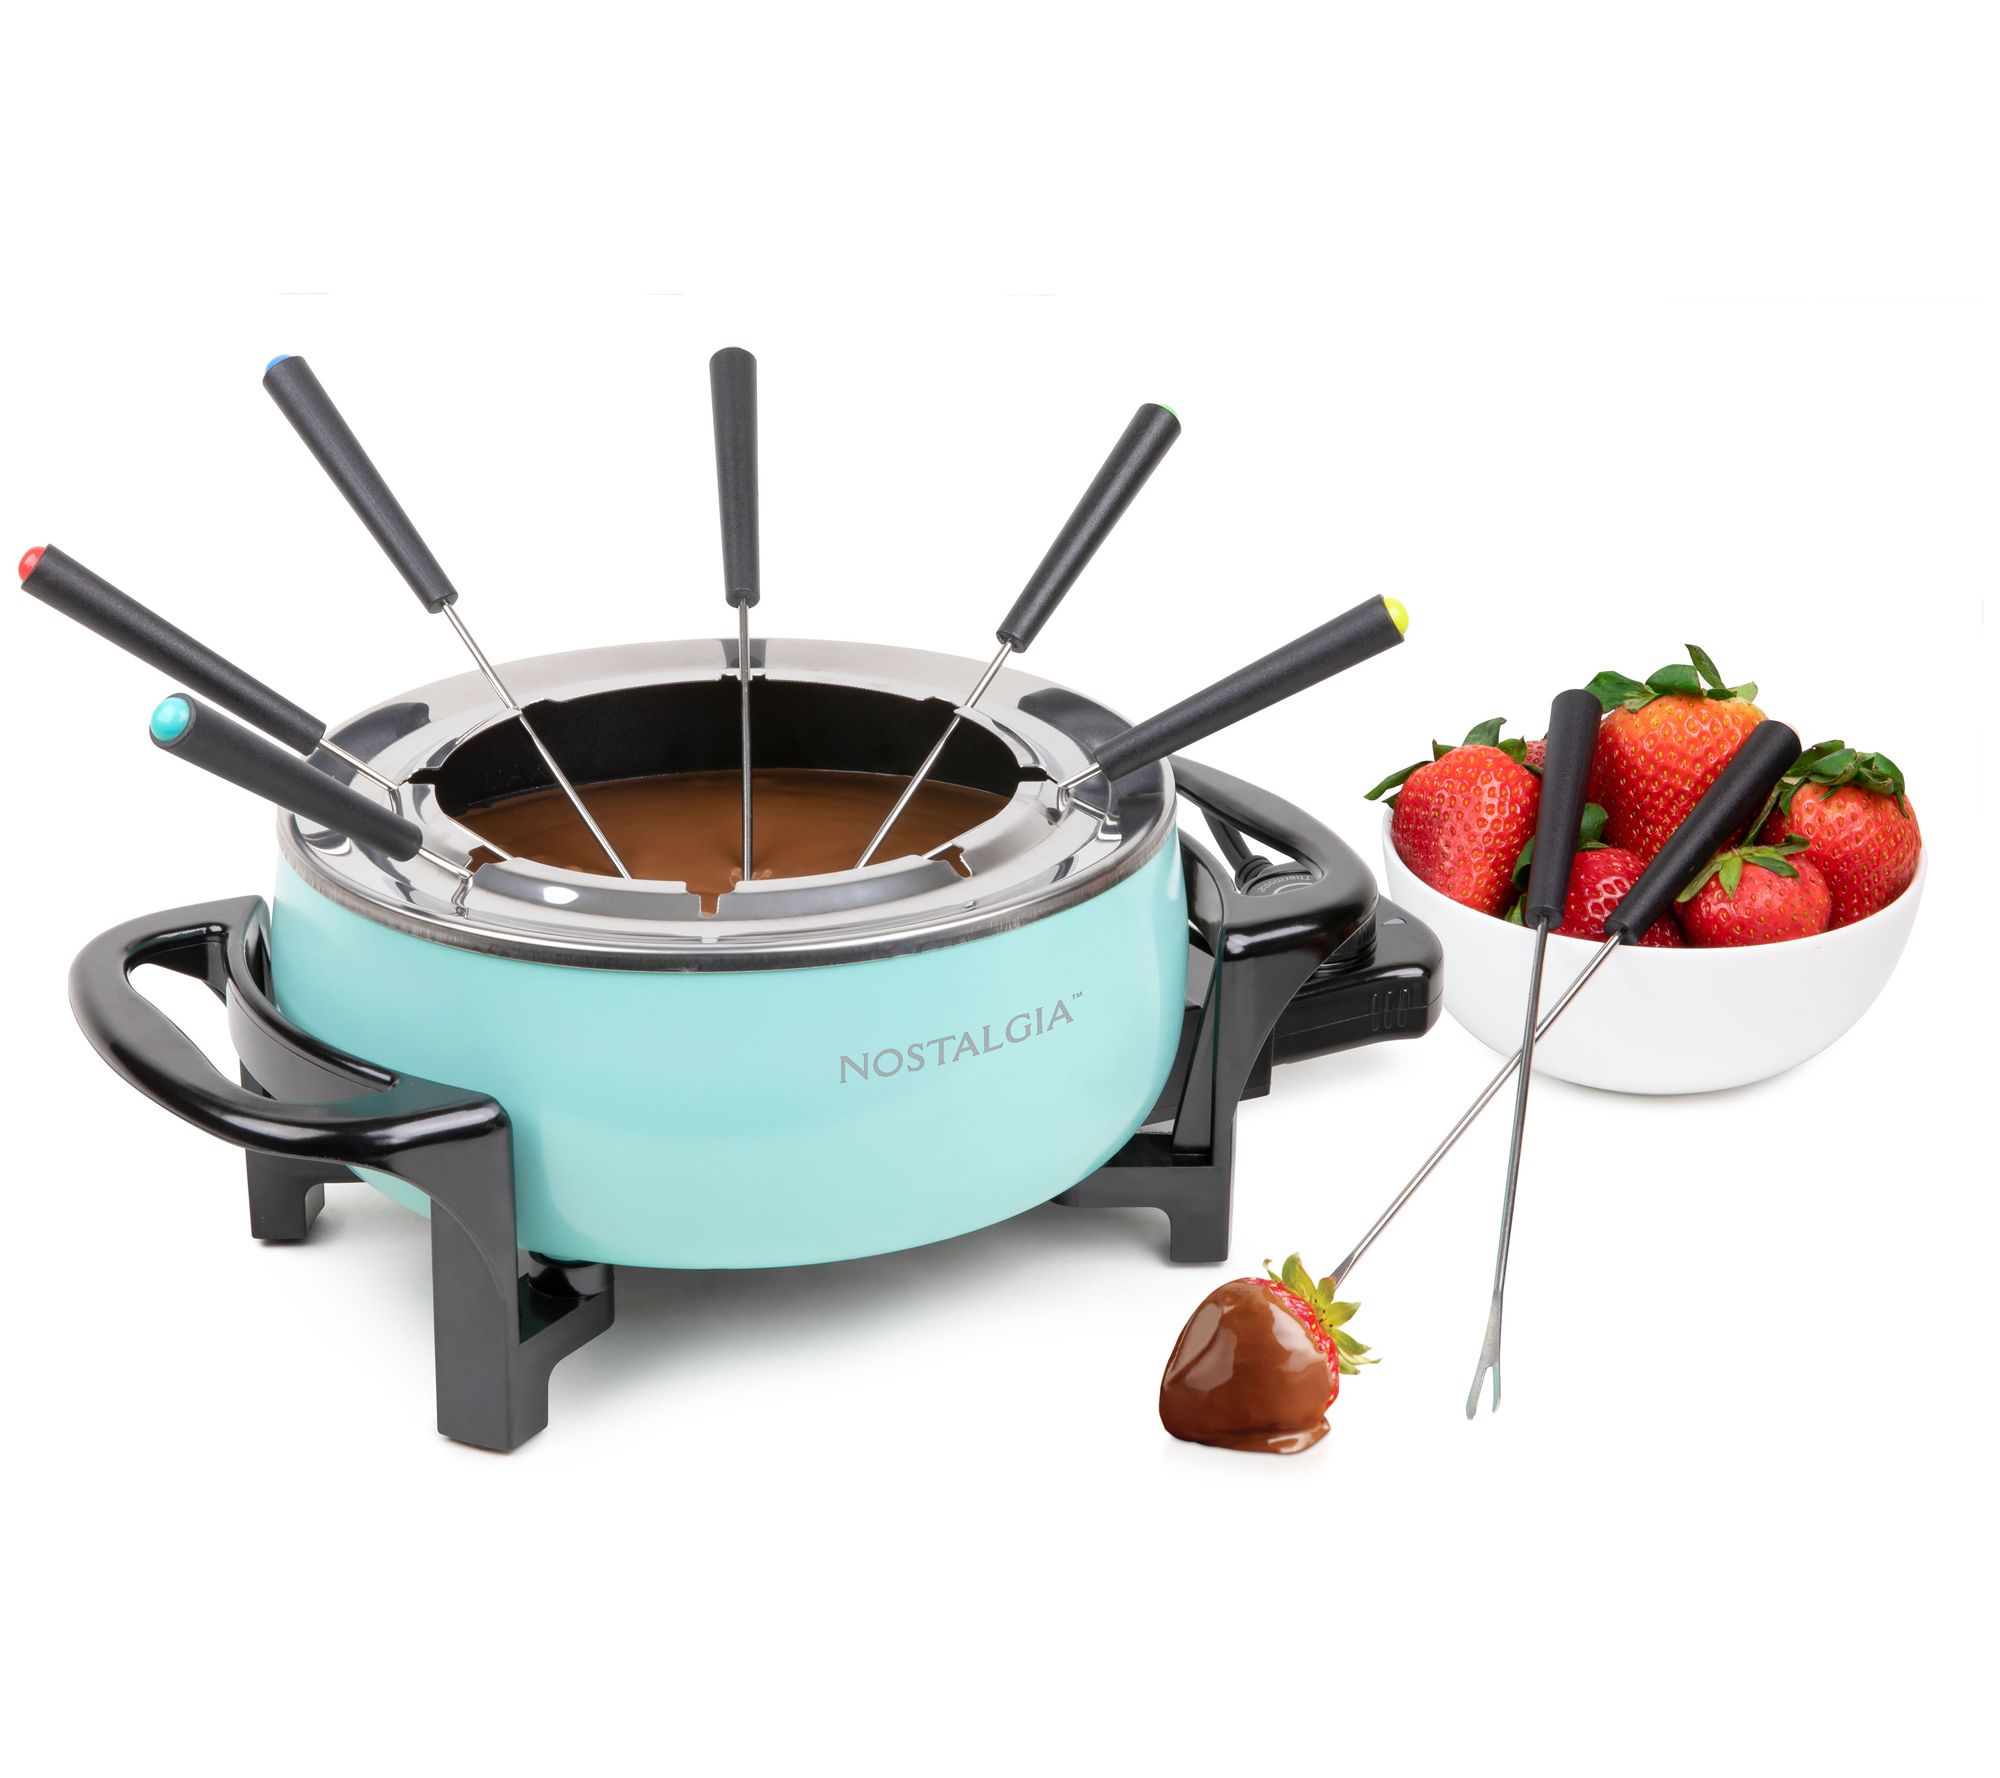 Oster 3-Quart Electric Fondue Pot, Large Capacity Non-stick Stainless Steel